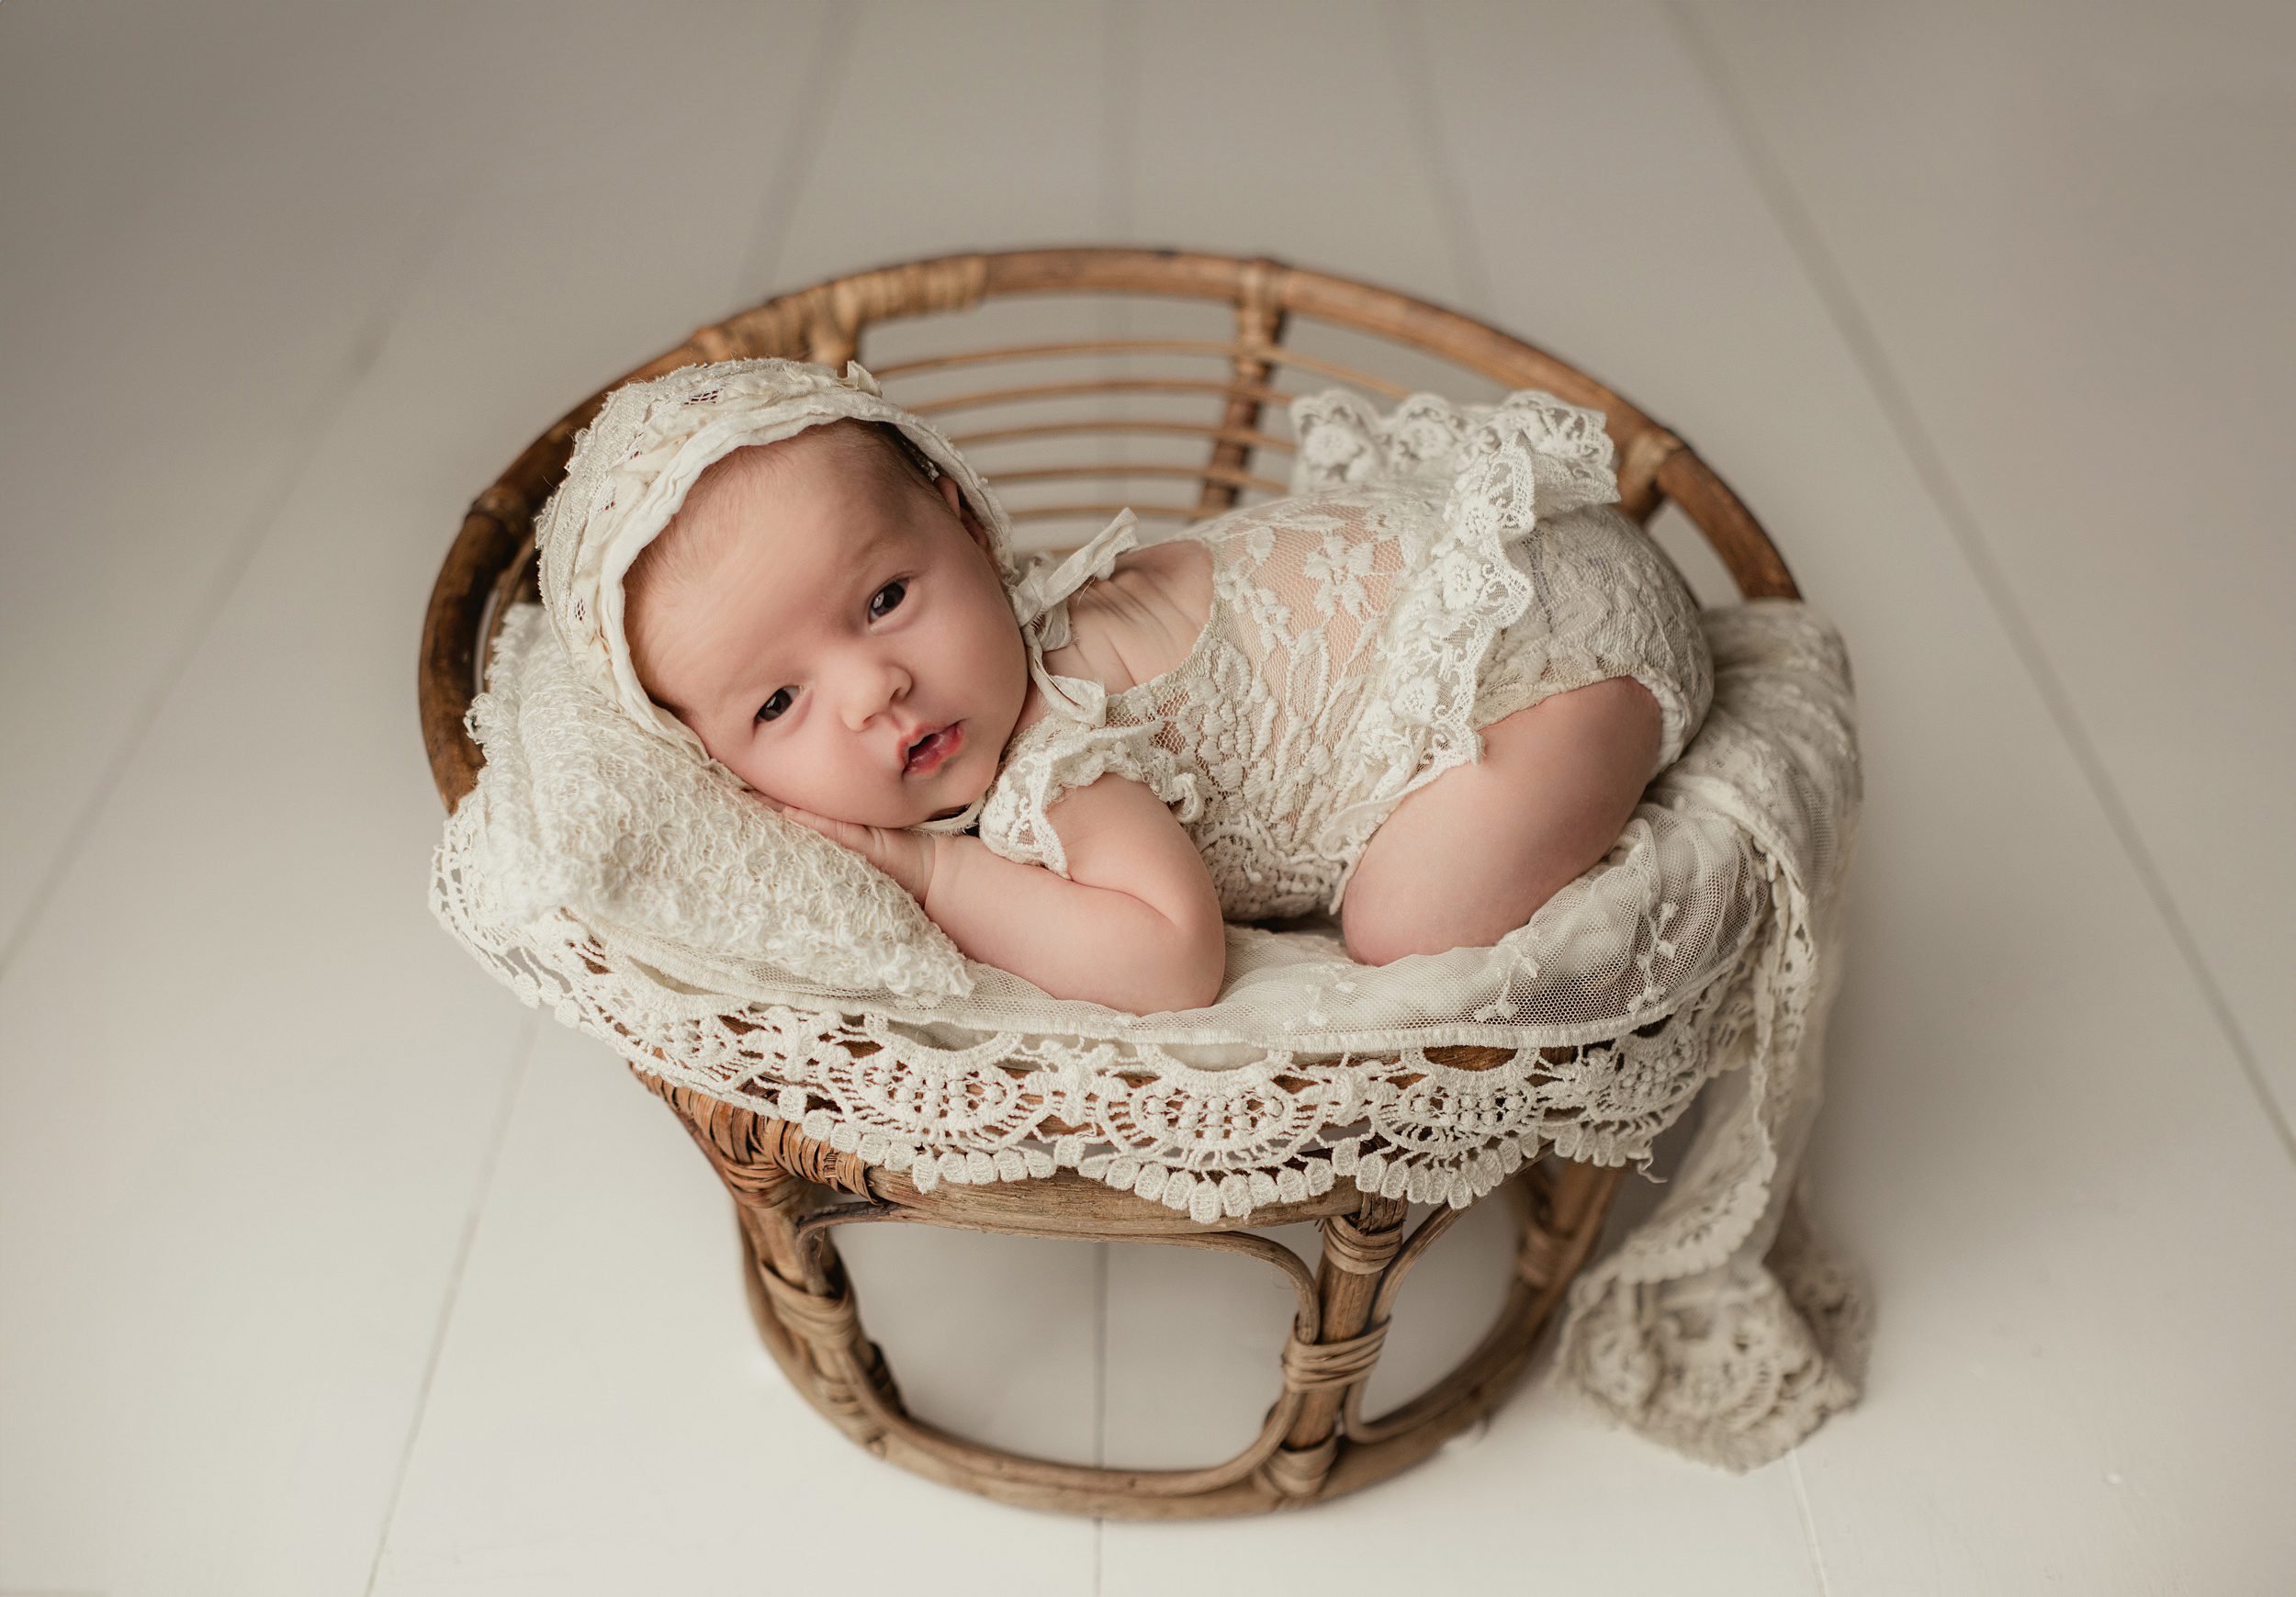 A newborn baby lays on a lace pillow and blanket in a wicker basket thanks to fertility centers of orange county